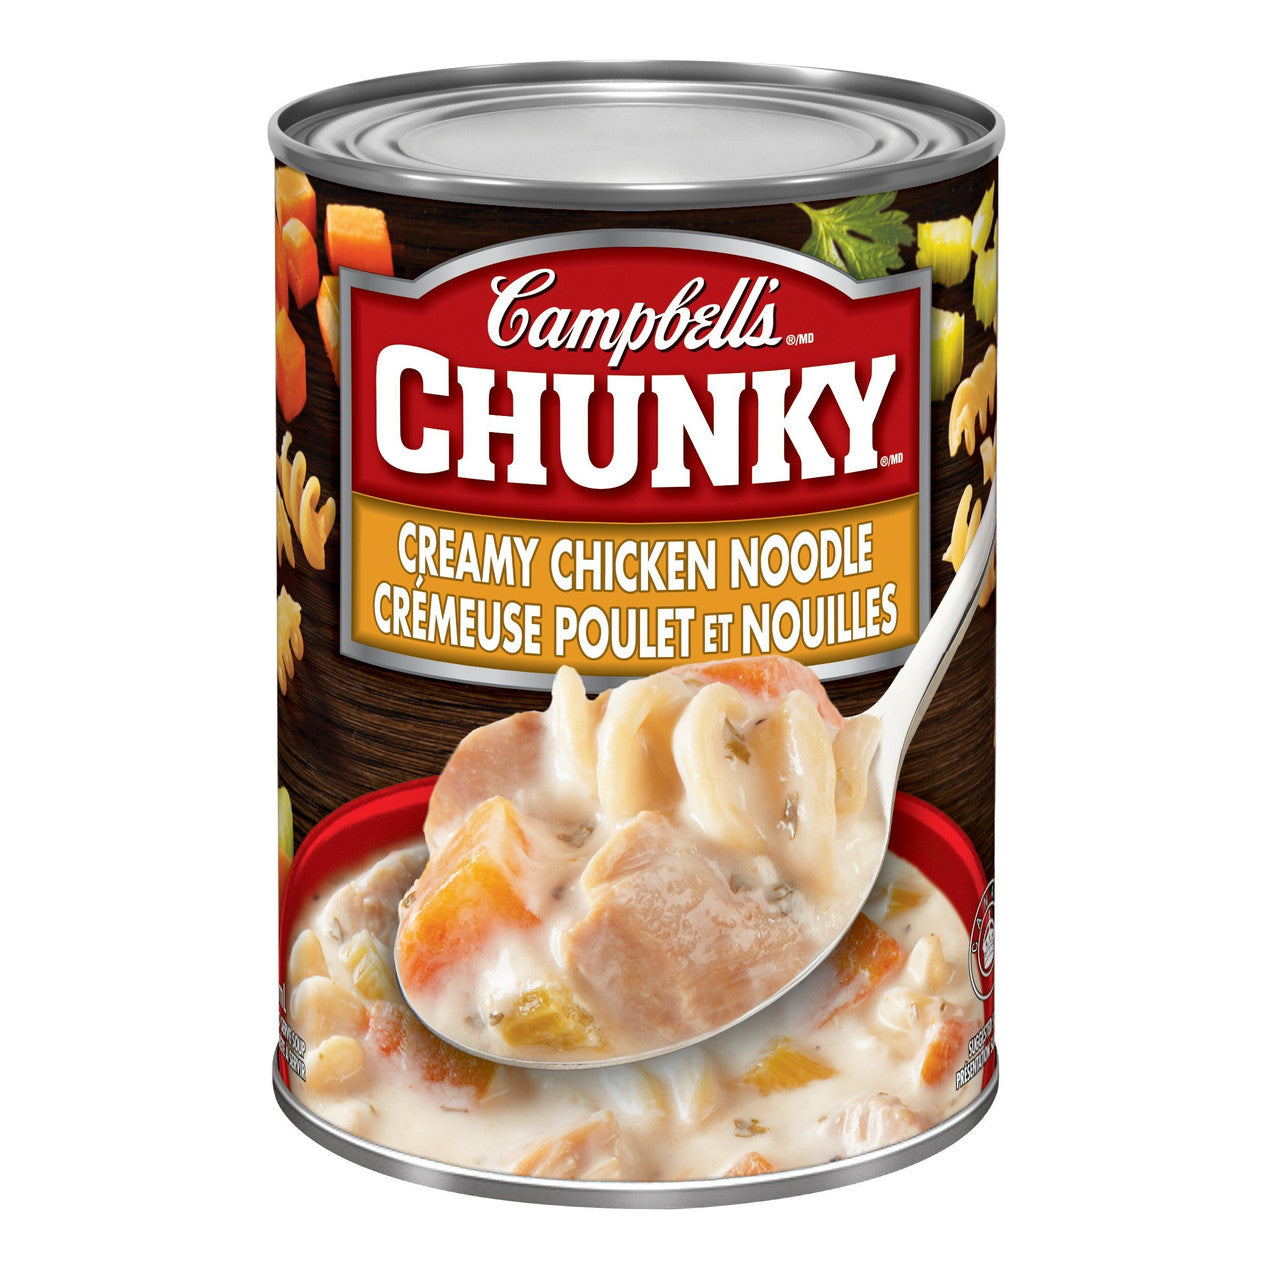 Campbell's Chunky, Creamy Chicken Noodle Soup, 540ml (Imported from Canada)